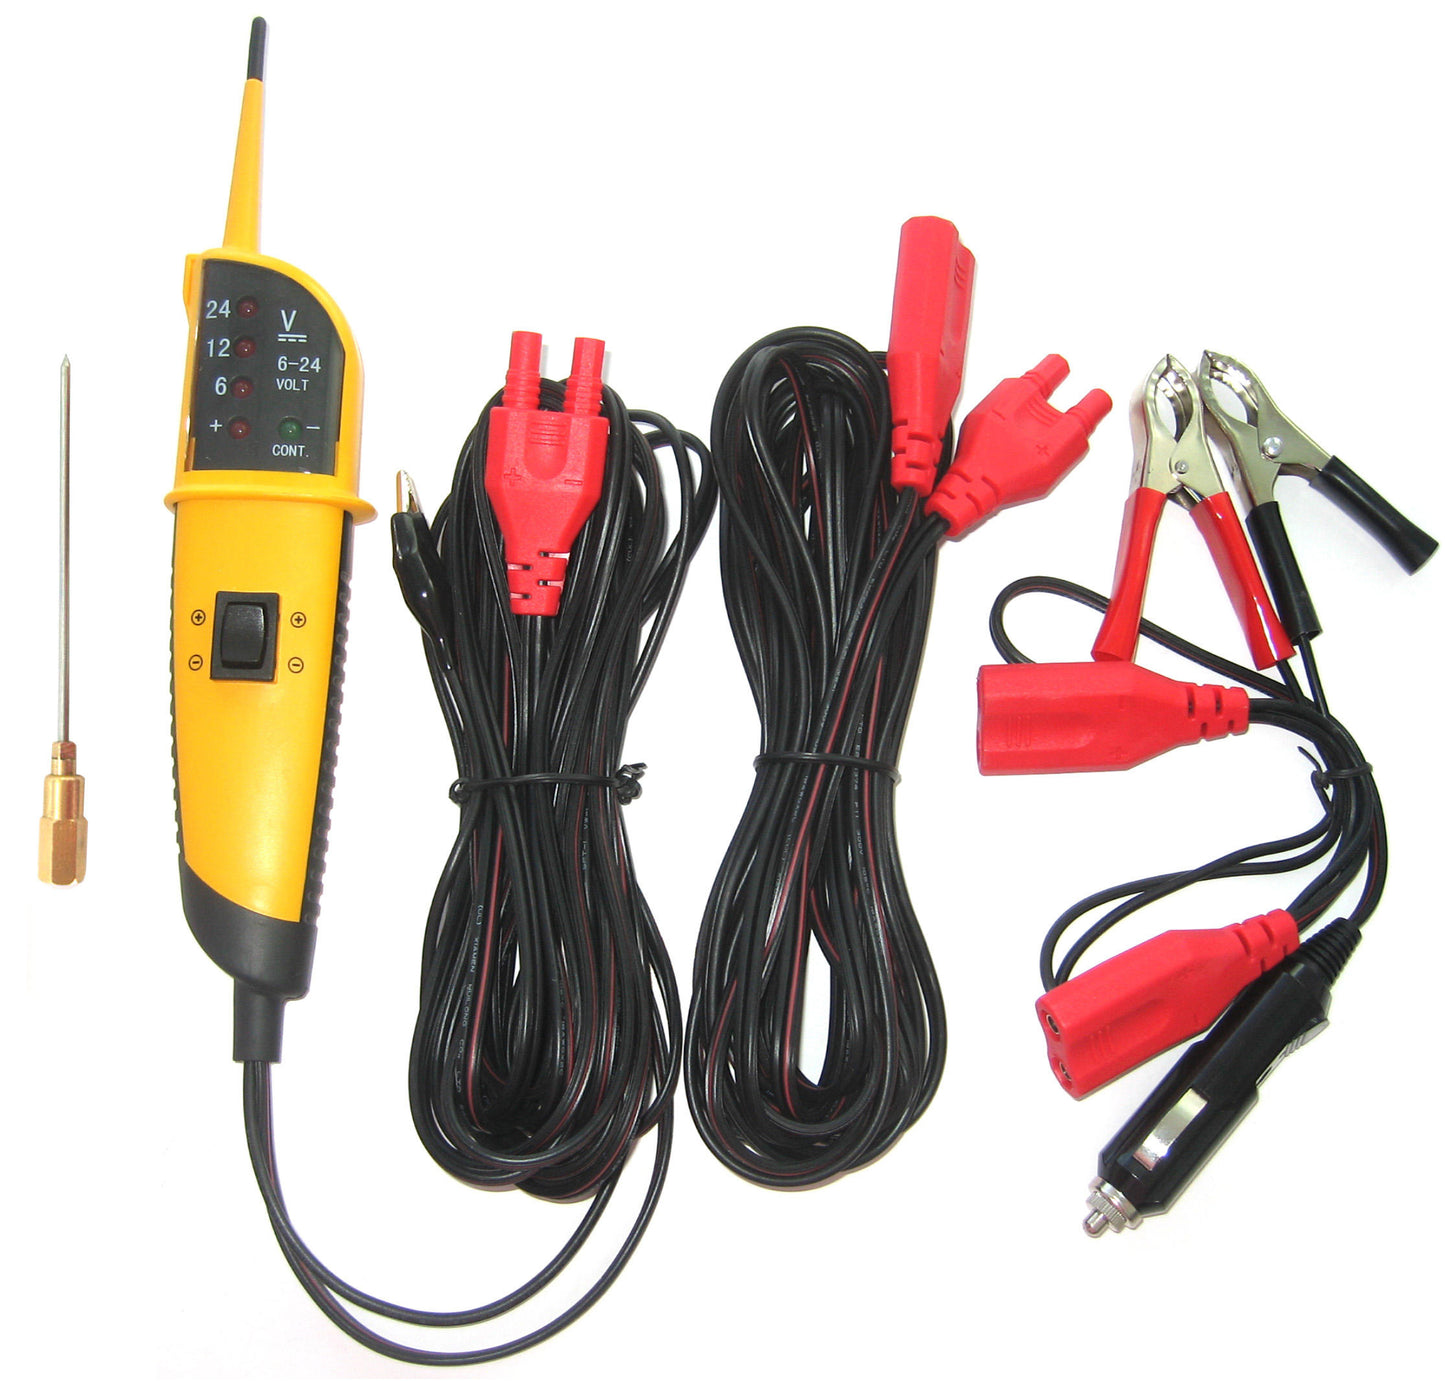 Multi-Function Auto Circuit Tester with LCD Display - Specialist Tools Australia